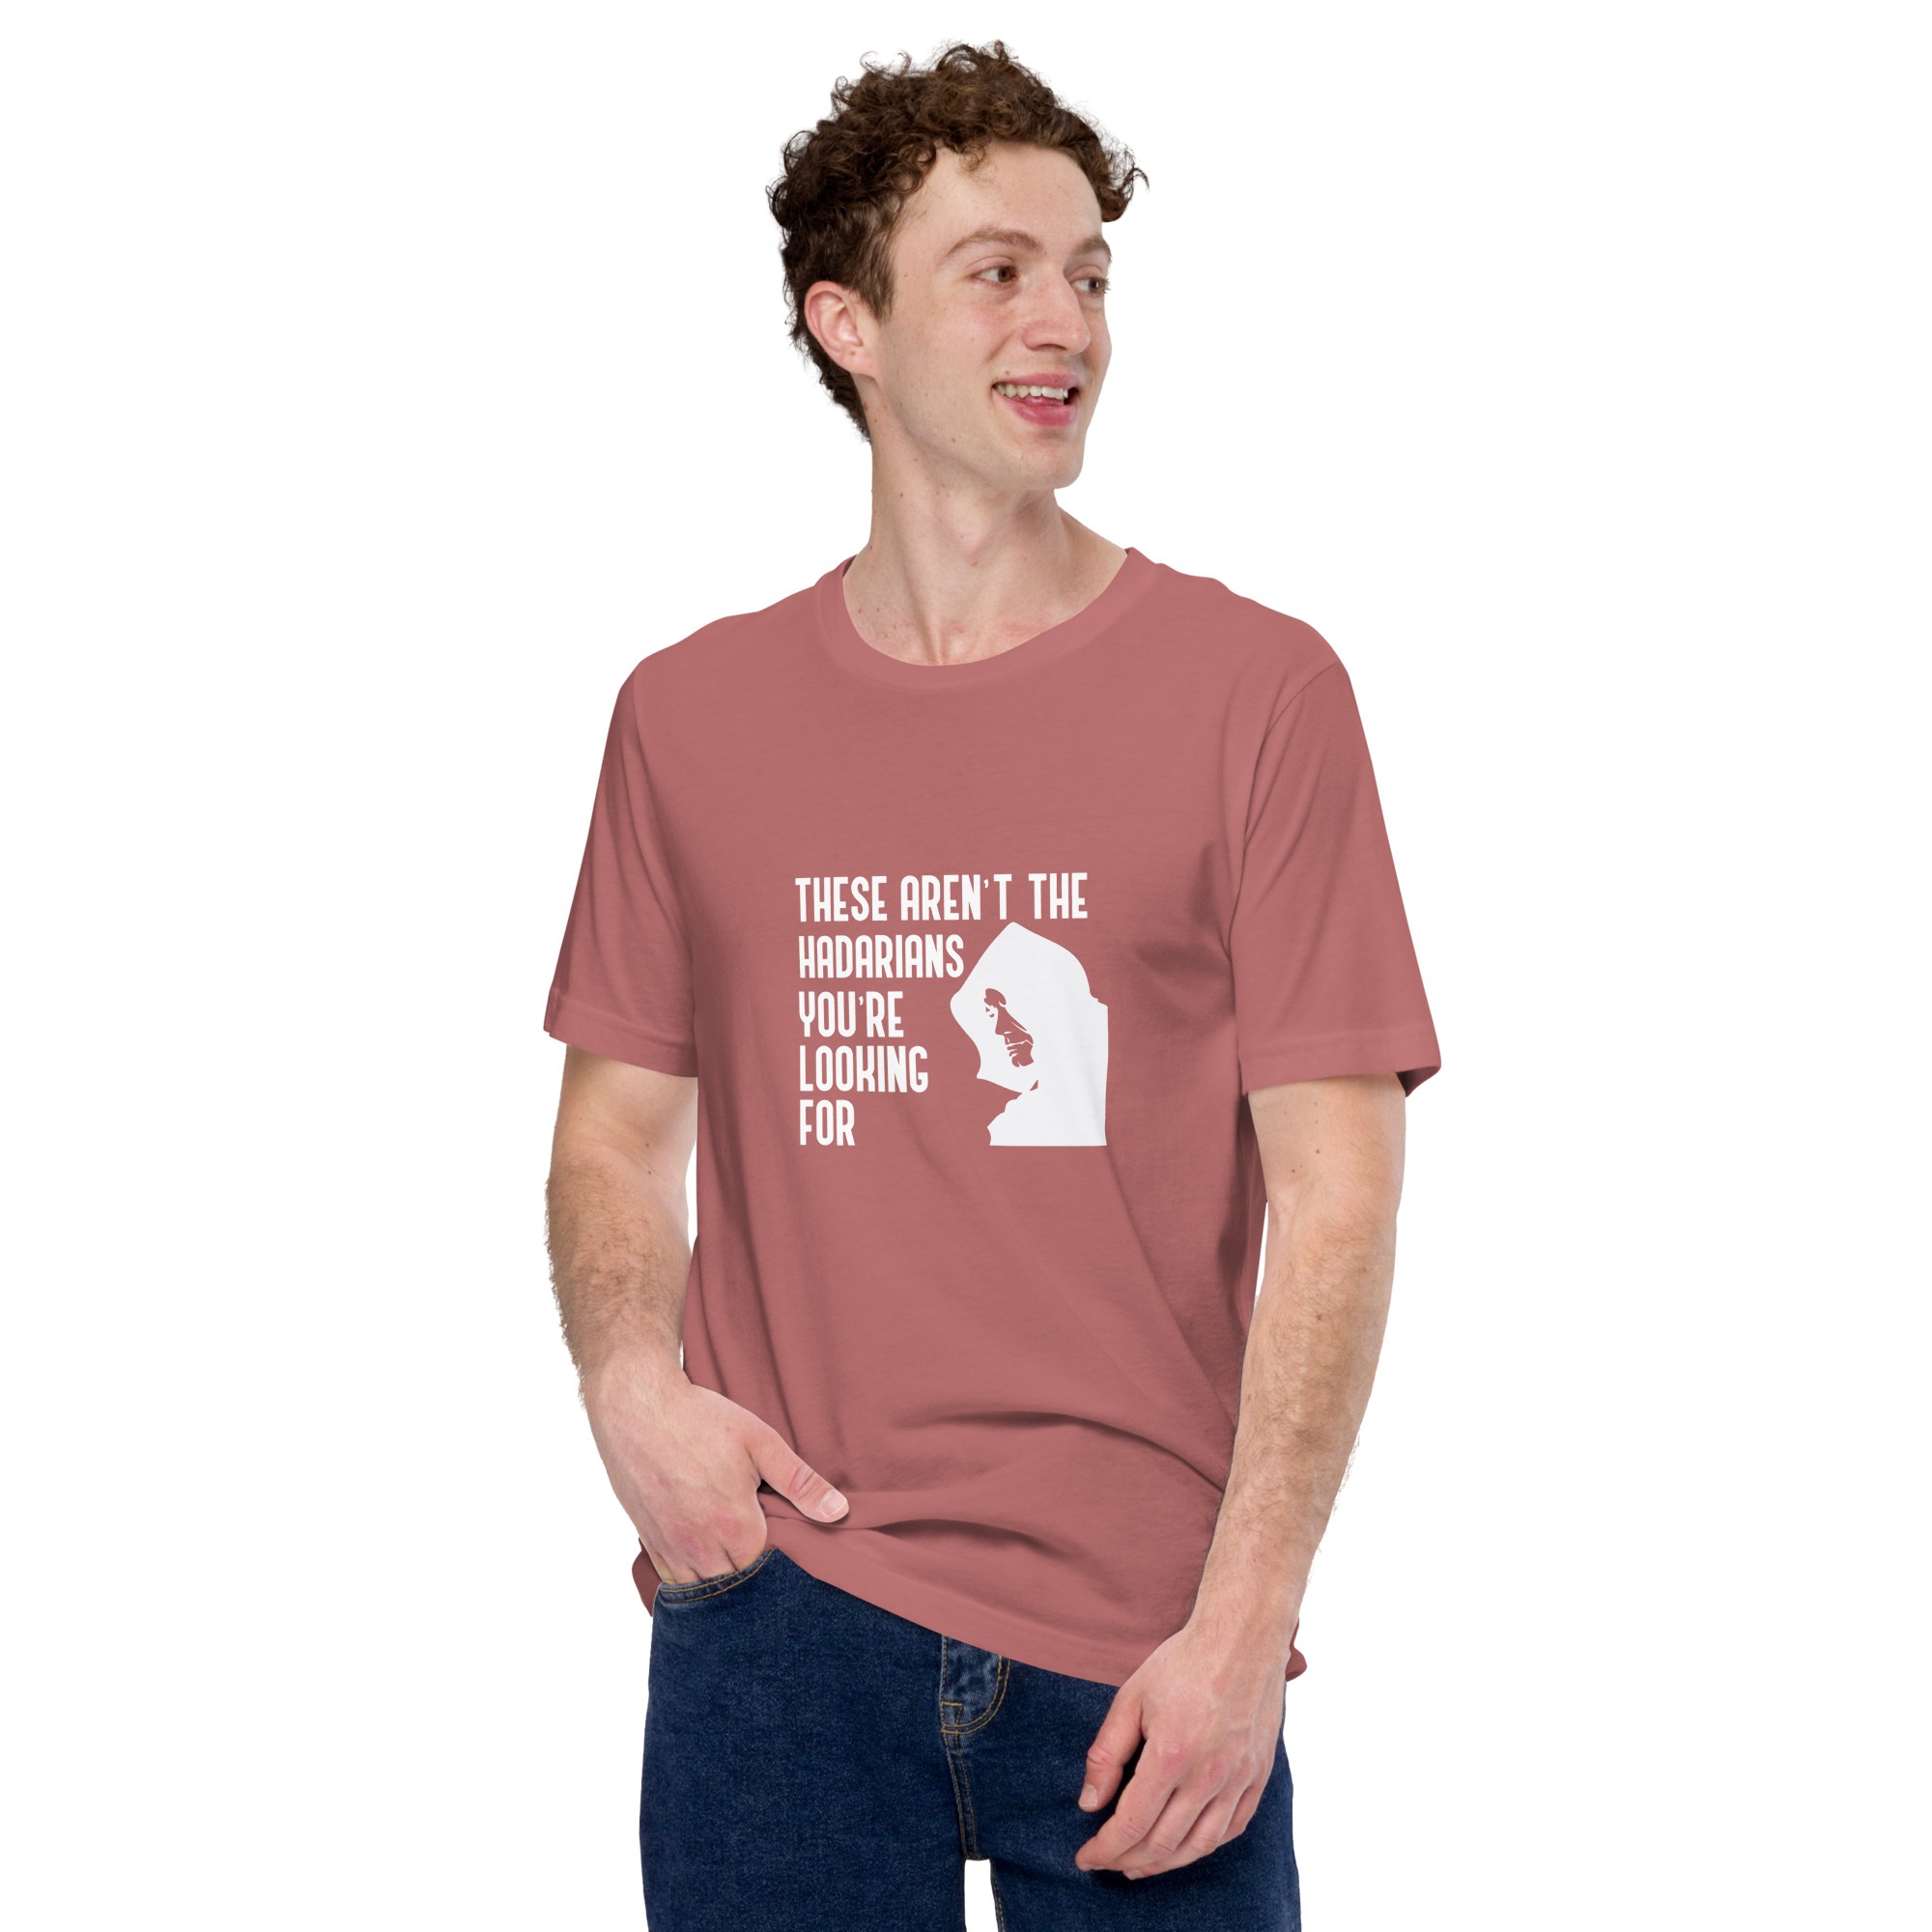 These Aren't The Hadarians You're Looking For Tshirt